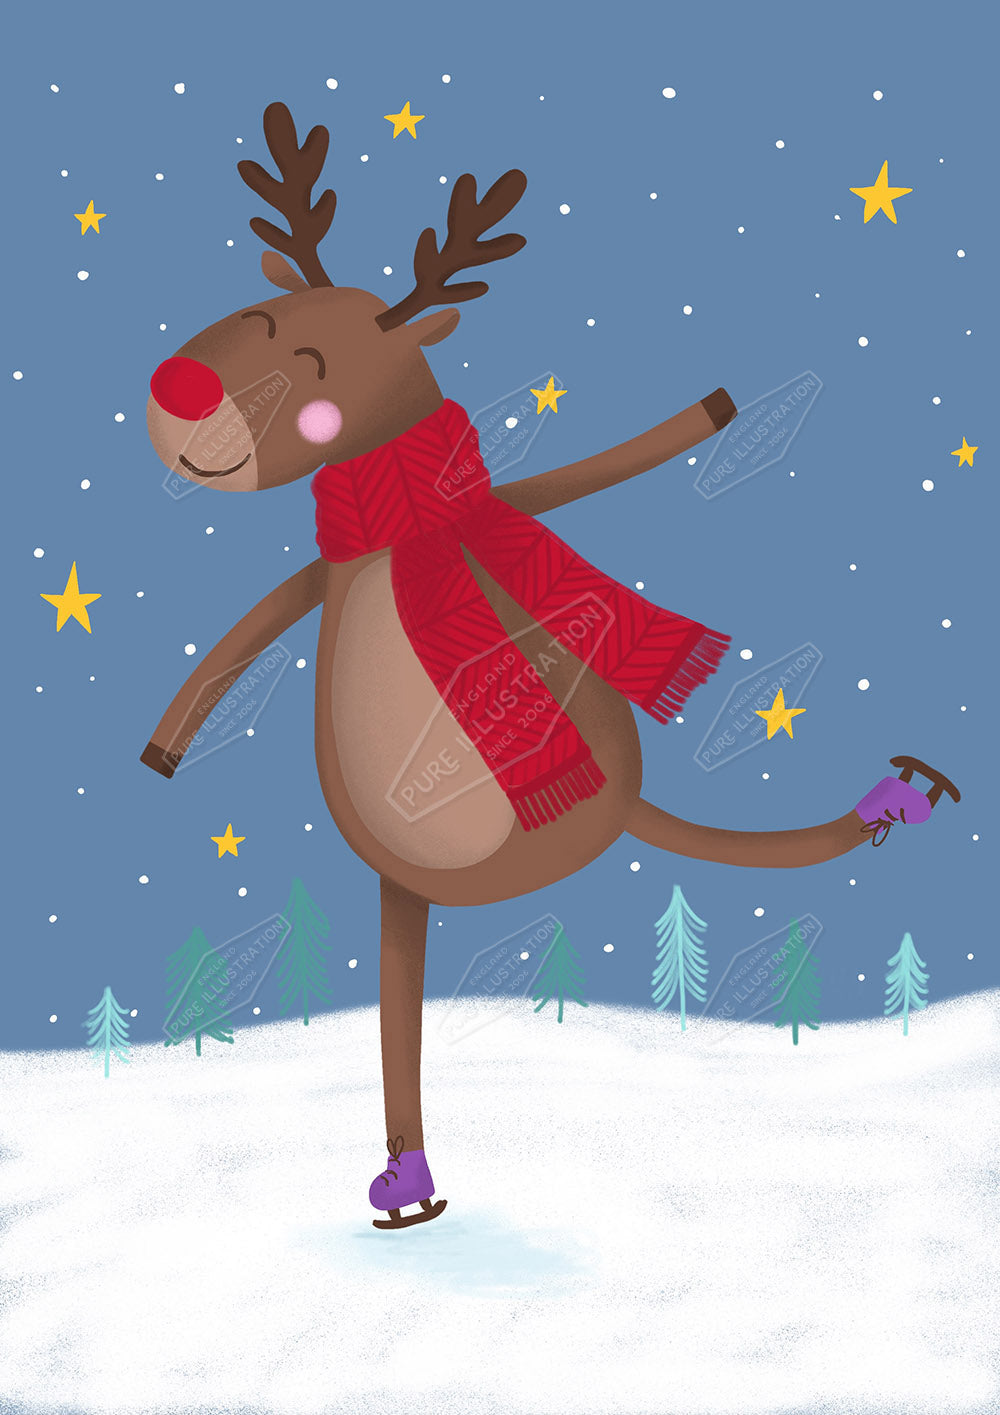 00033765JPH - Jessica Philpott is represented by Pure Art Licensing Agency - Christmas Greeting Card Design